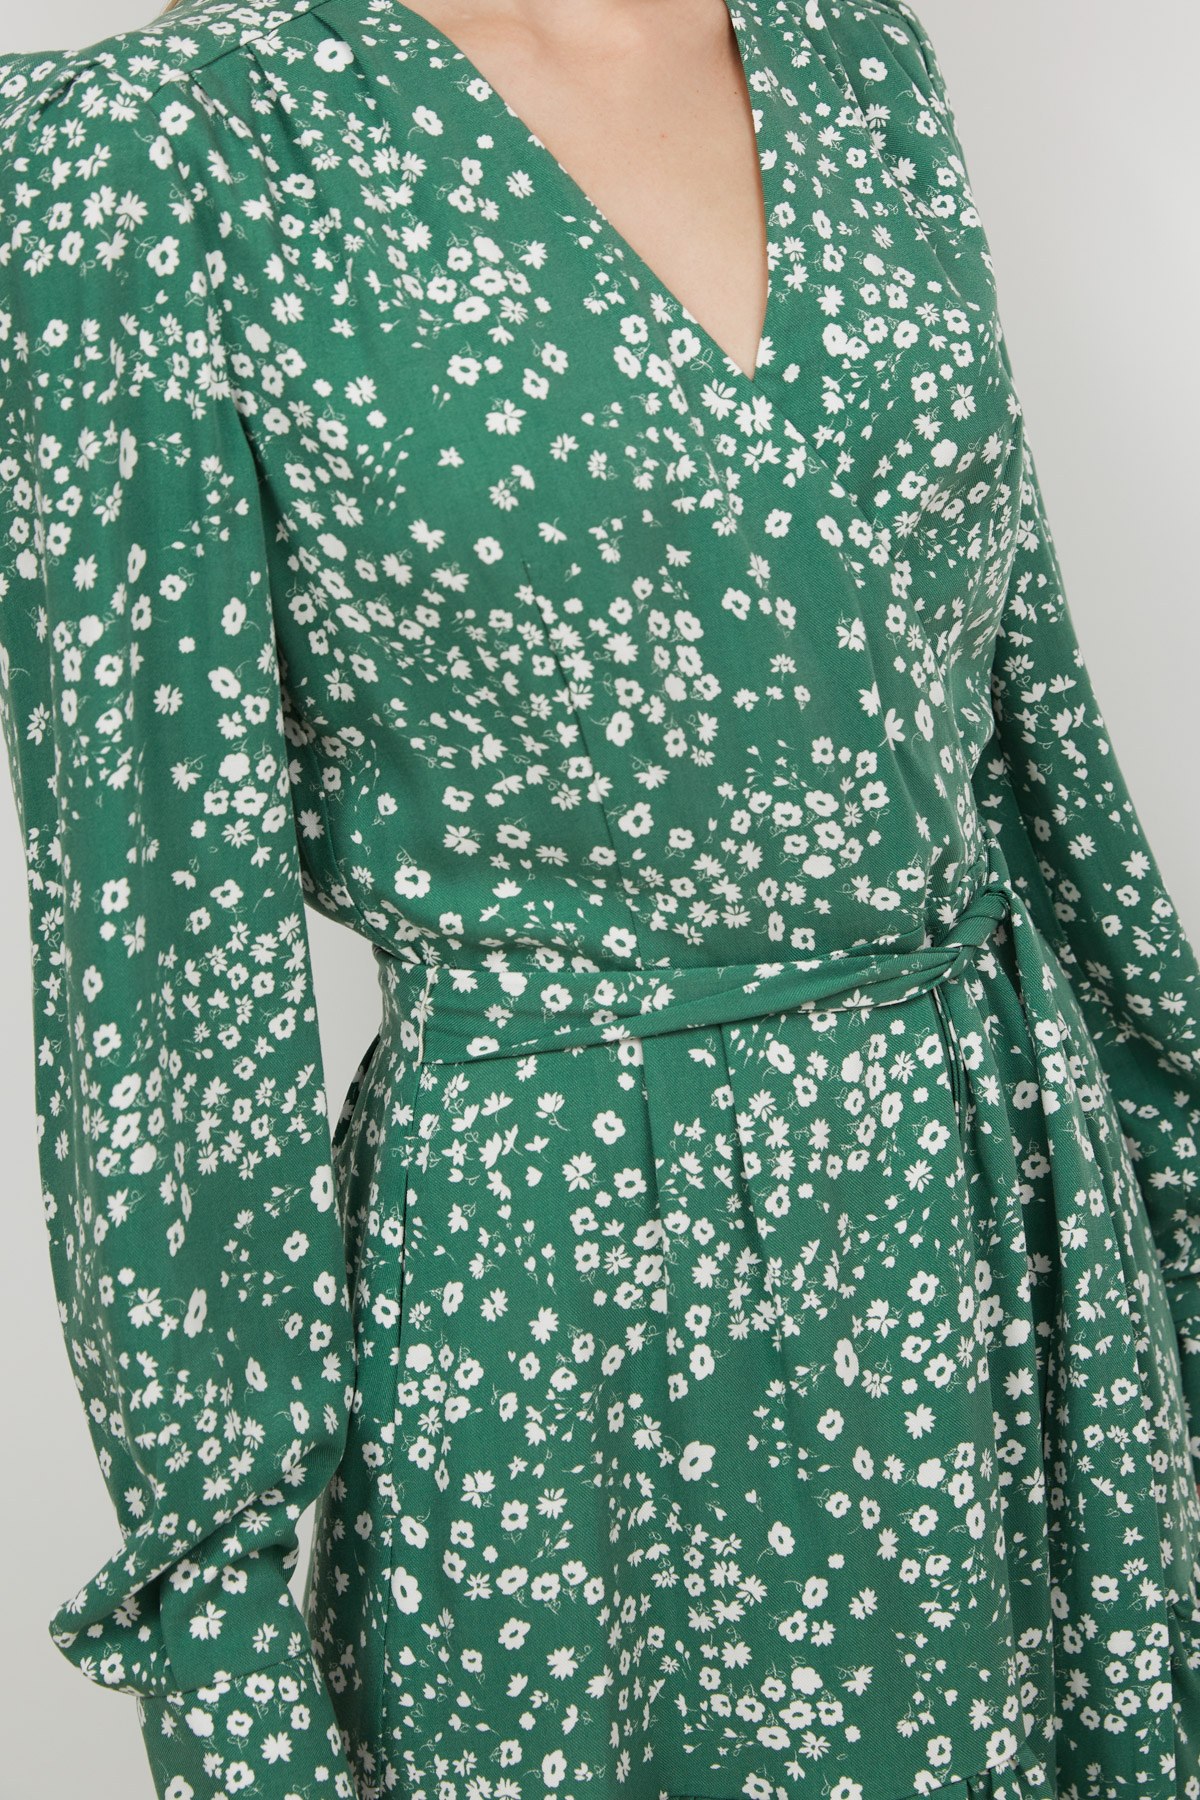 Short viscose dress in green with floral print, photo 4